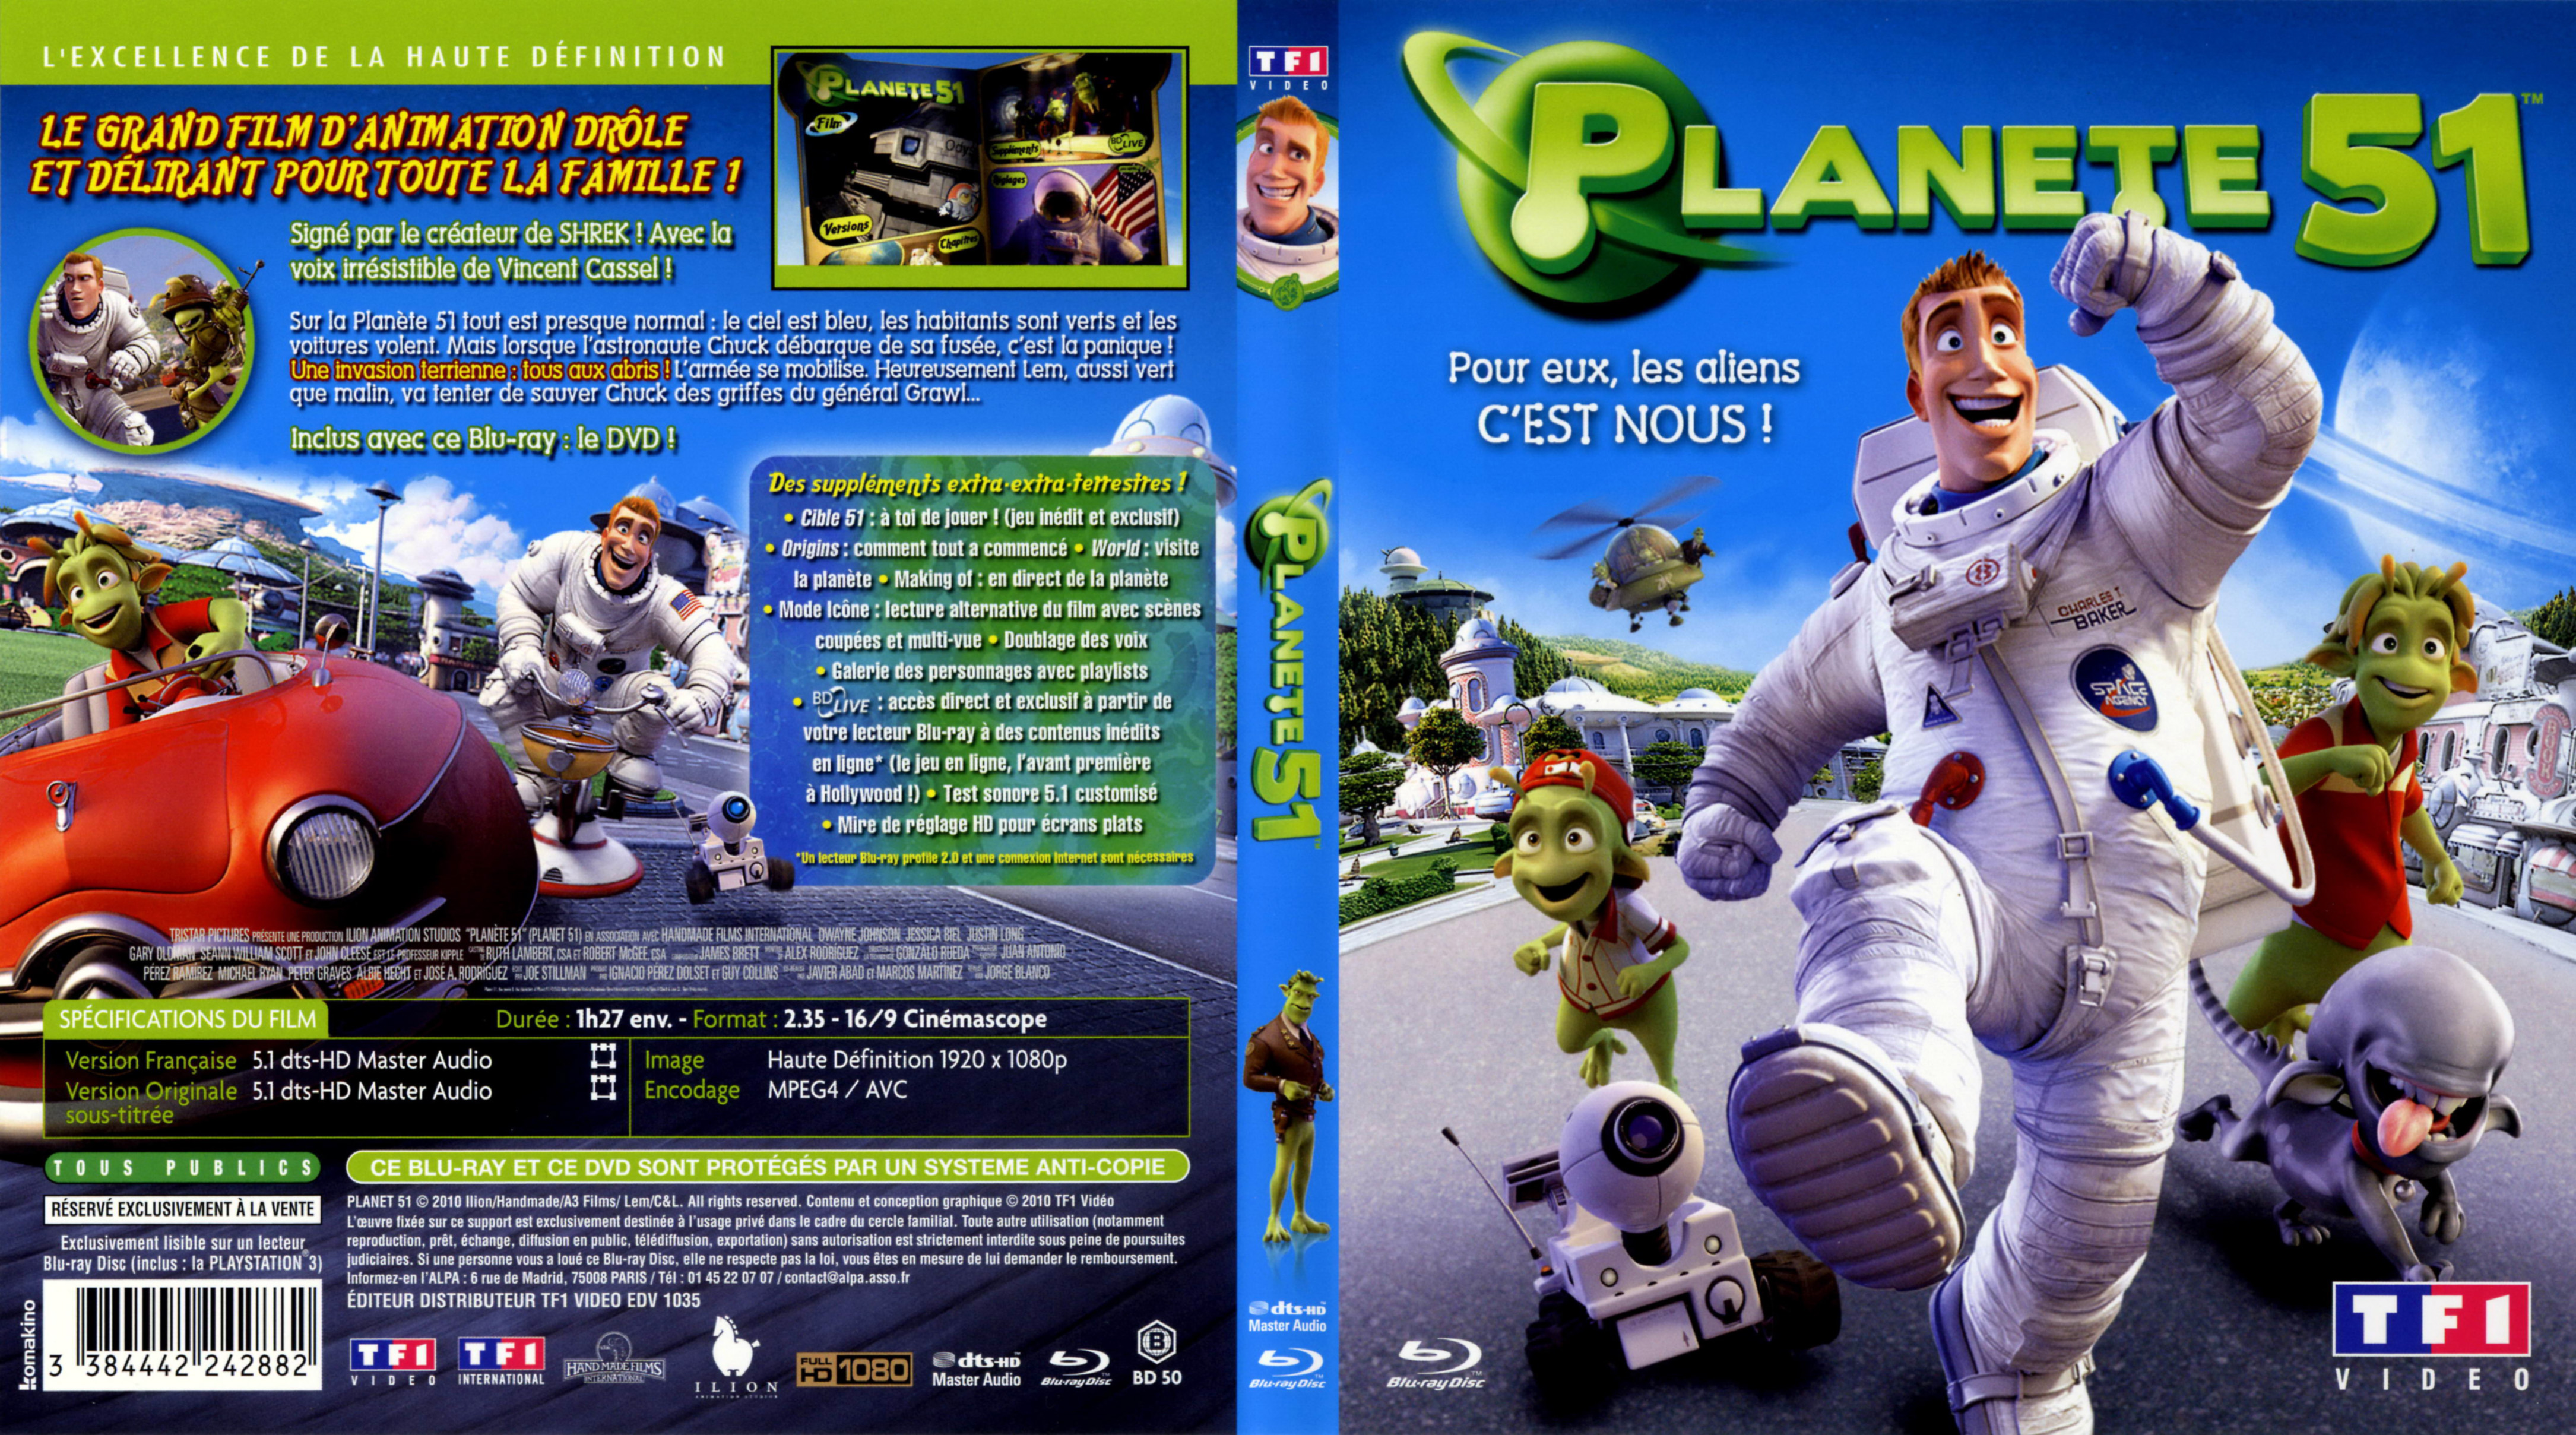 Jaquette DVD Planete 51 (BLU-RAY)